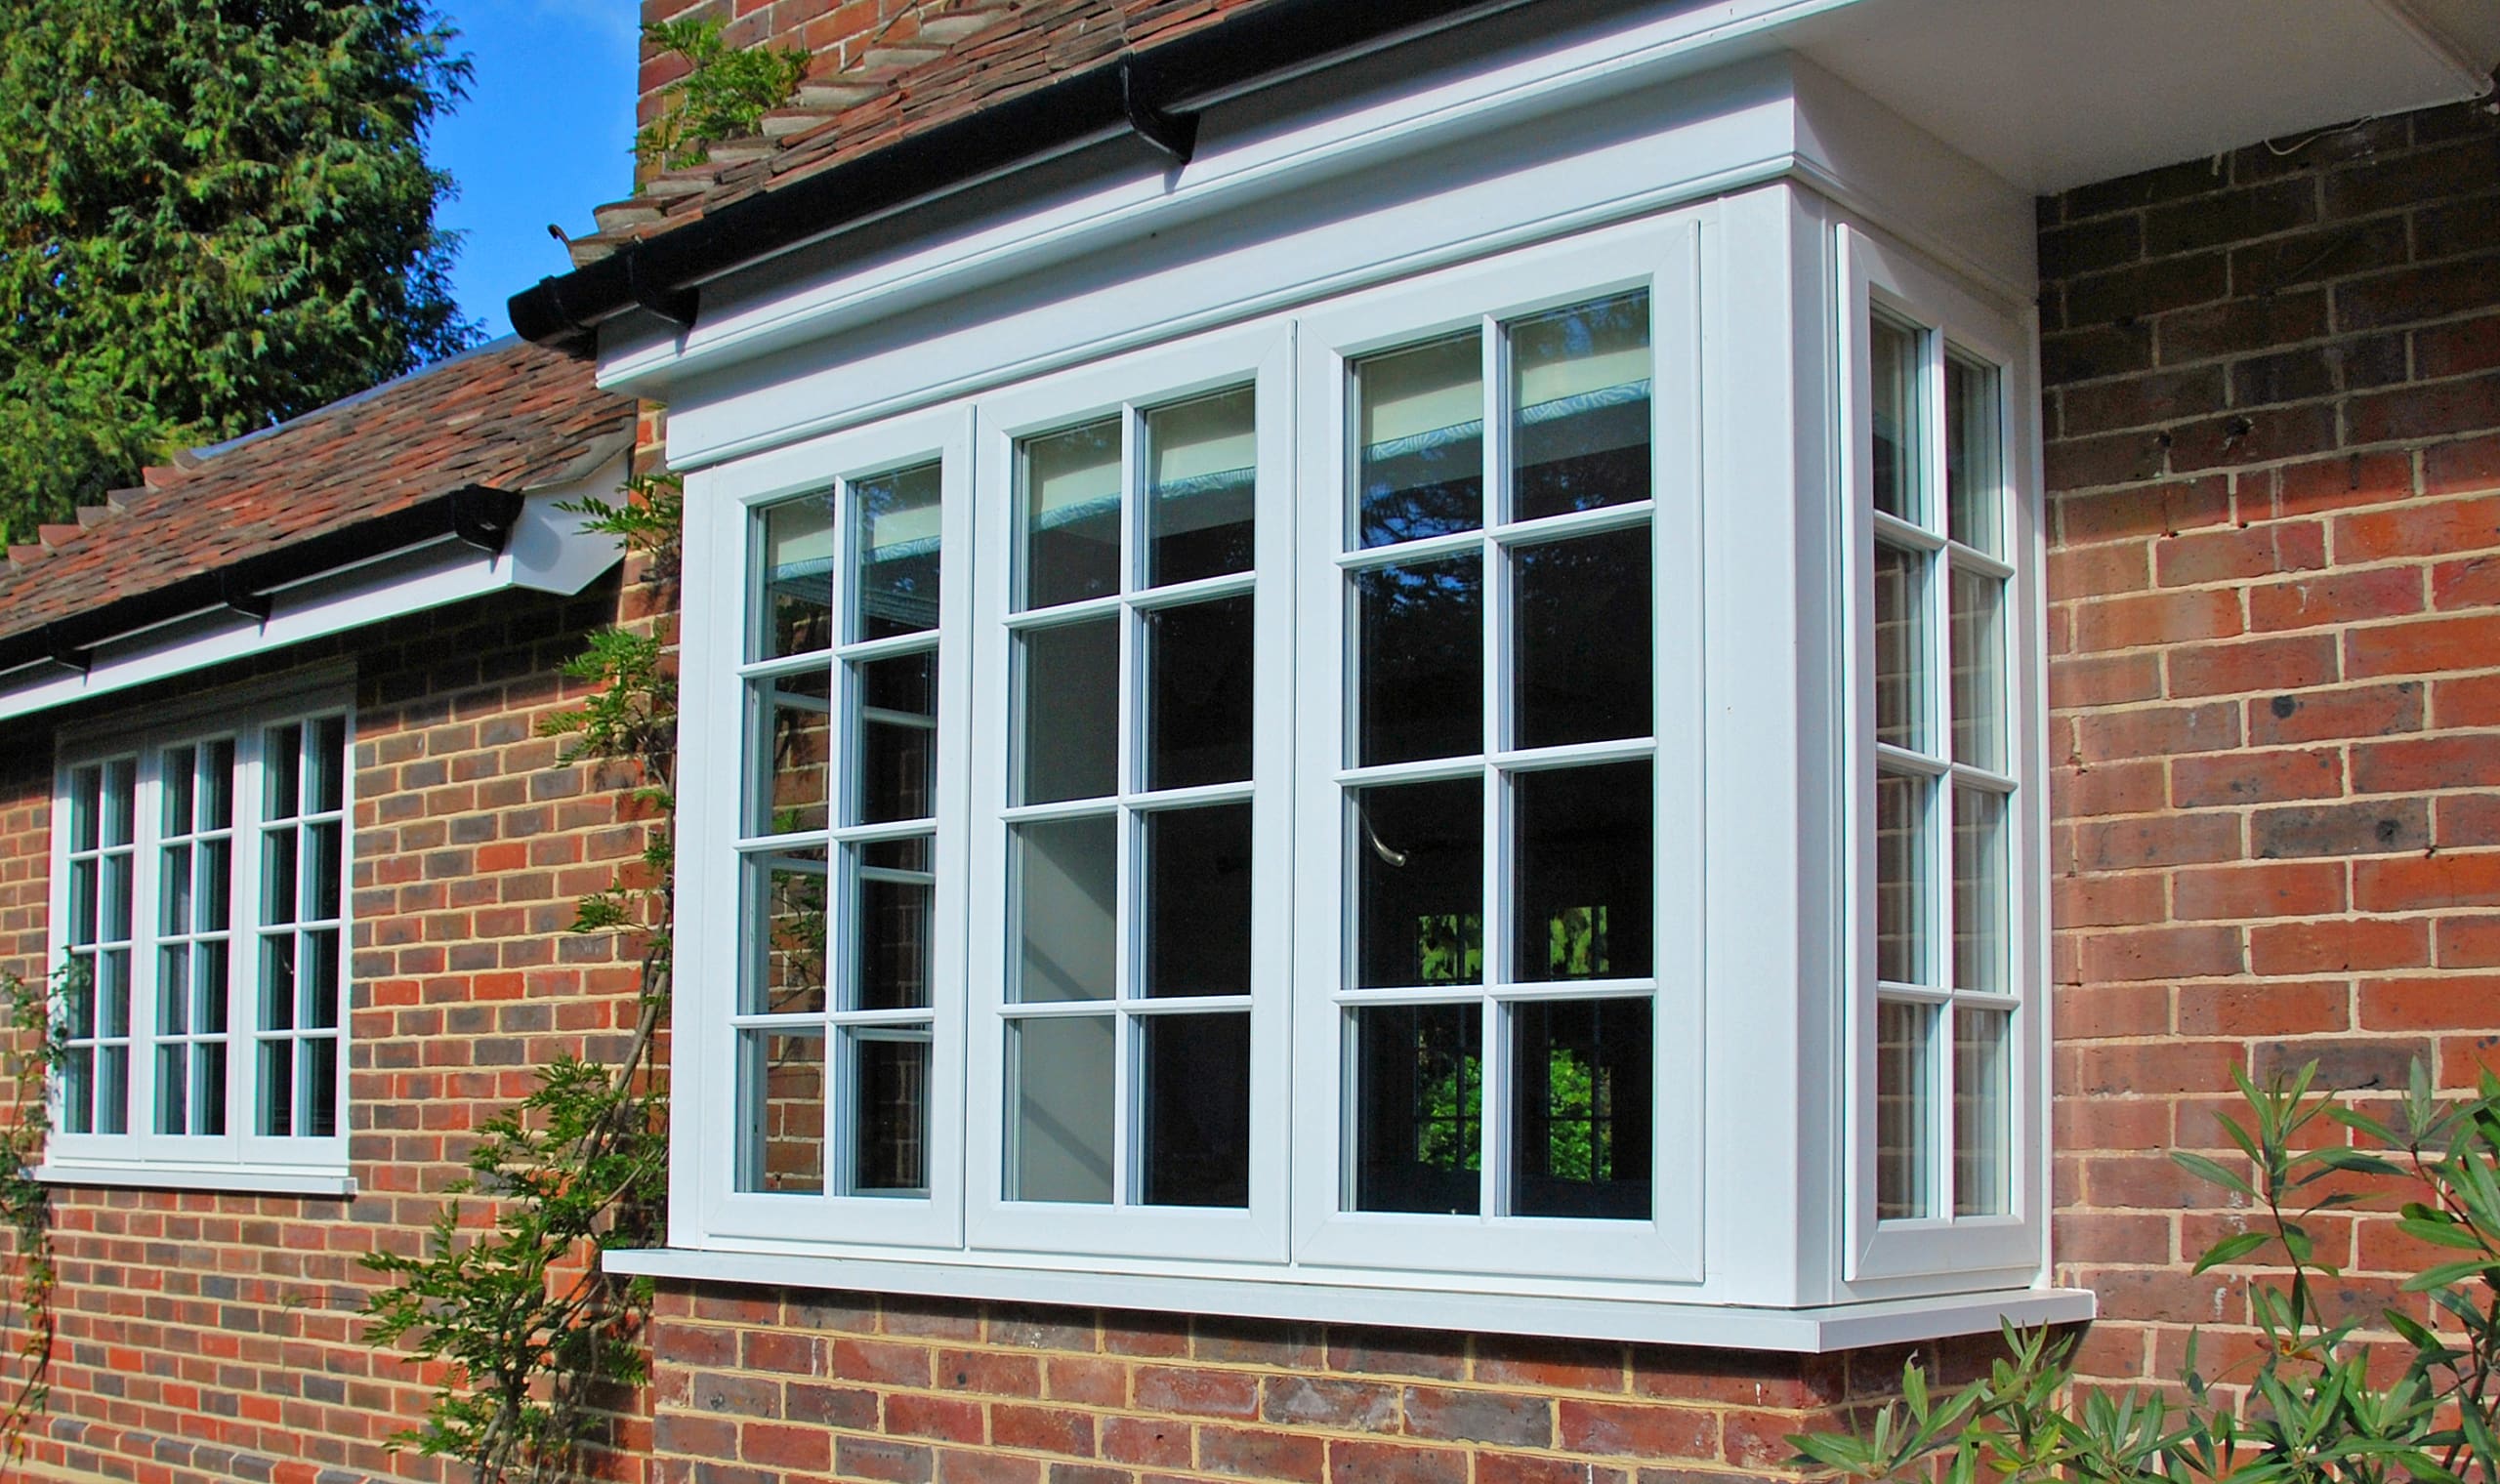 Bay window finished with traditional style modern windows.